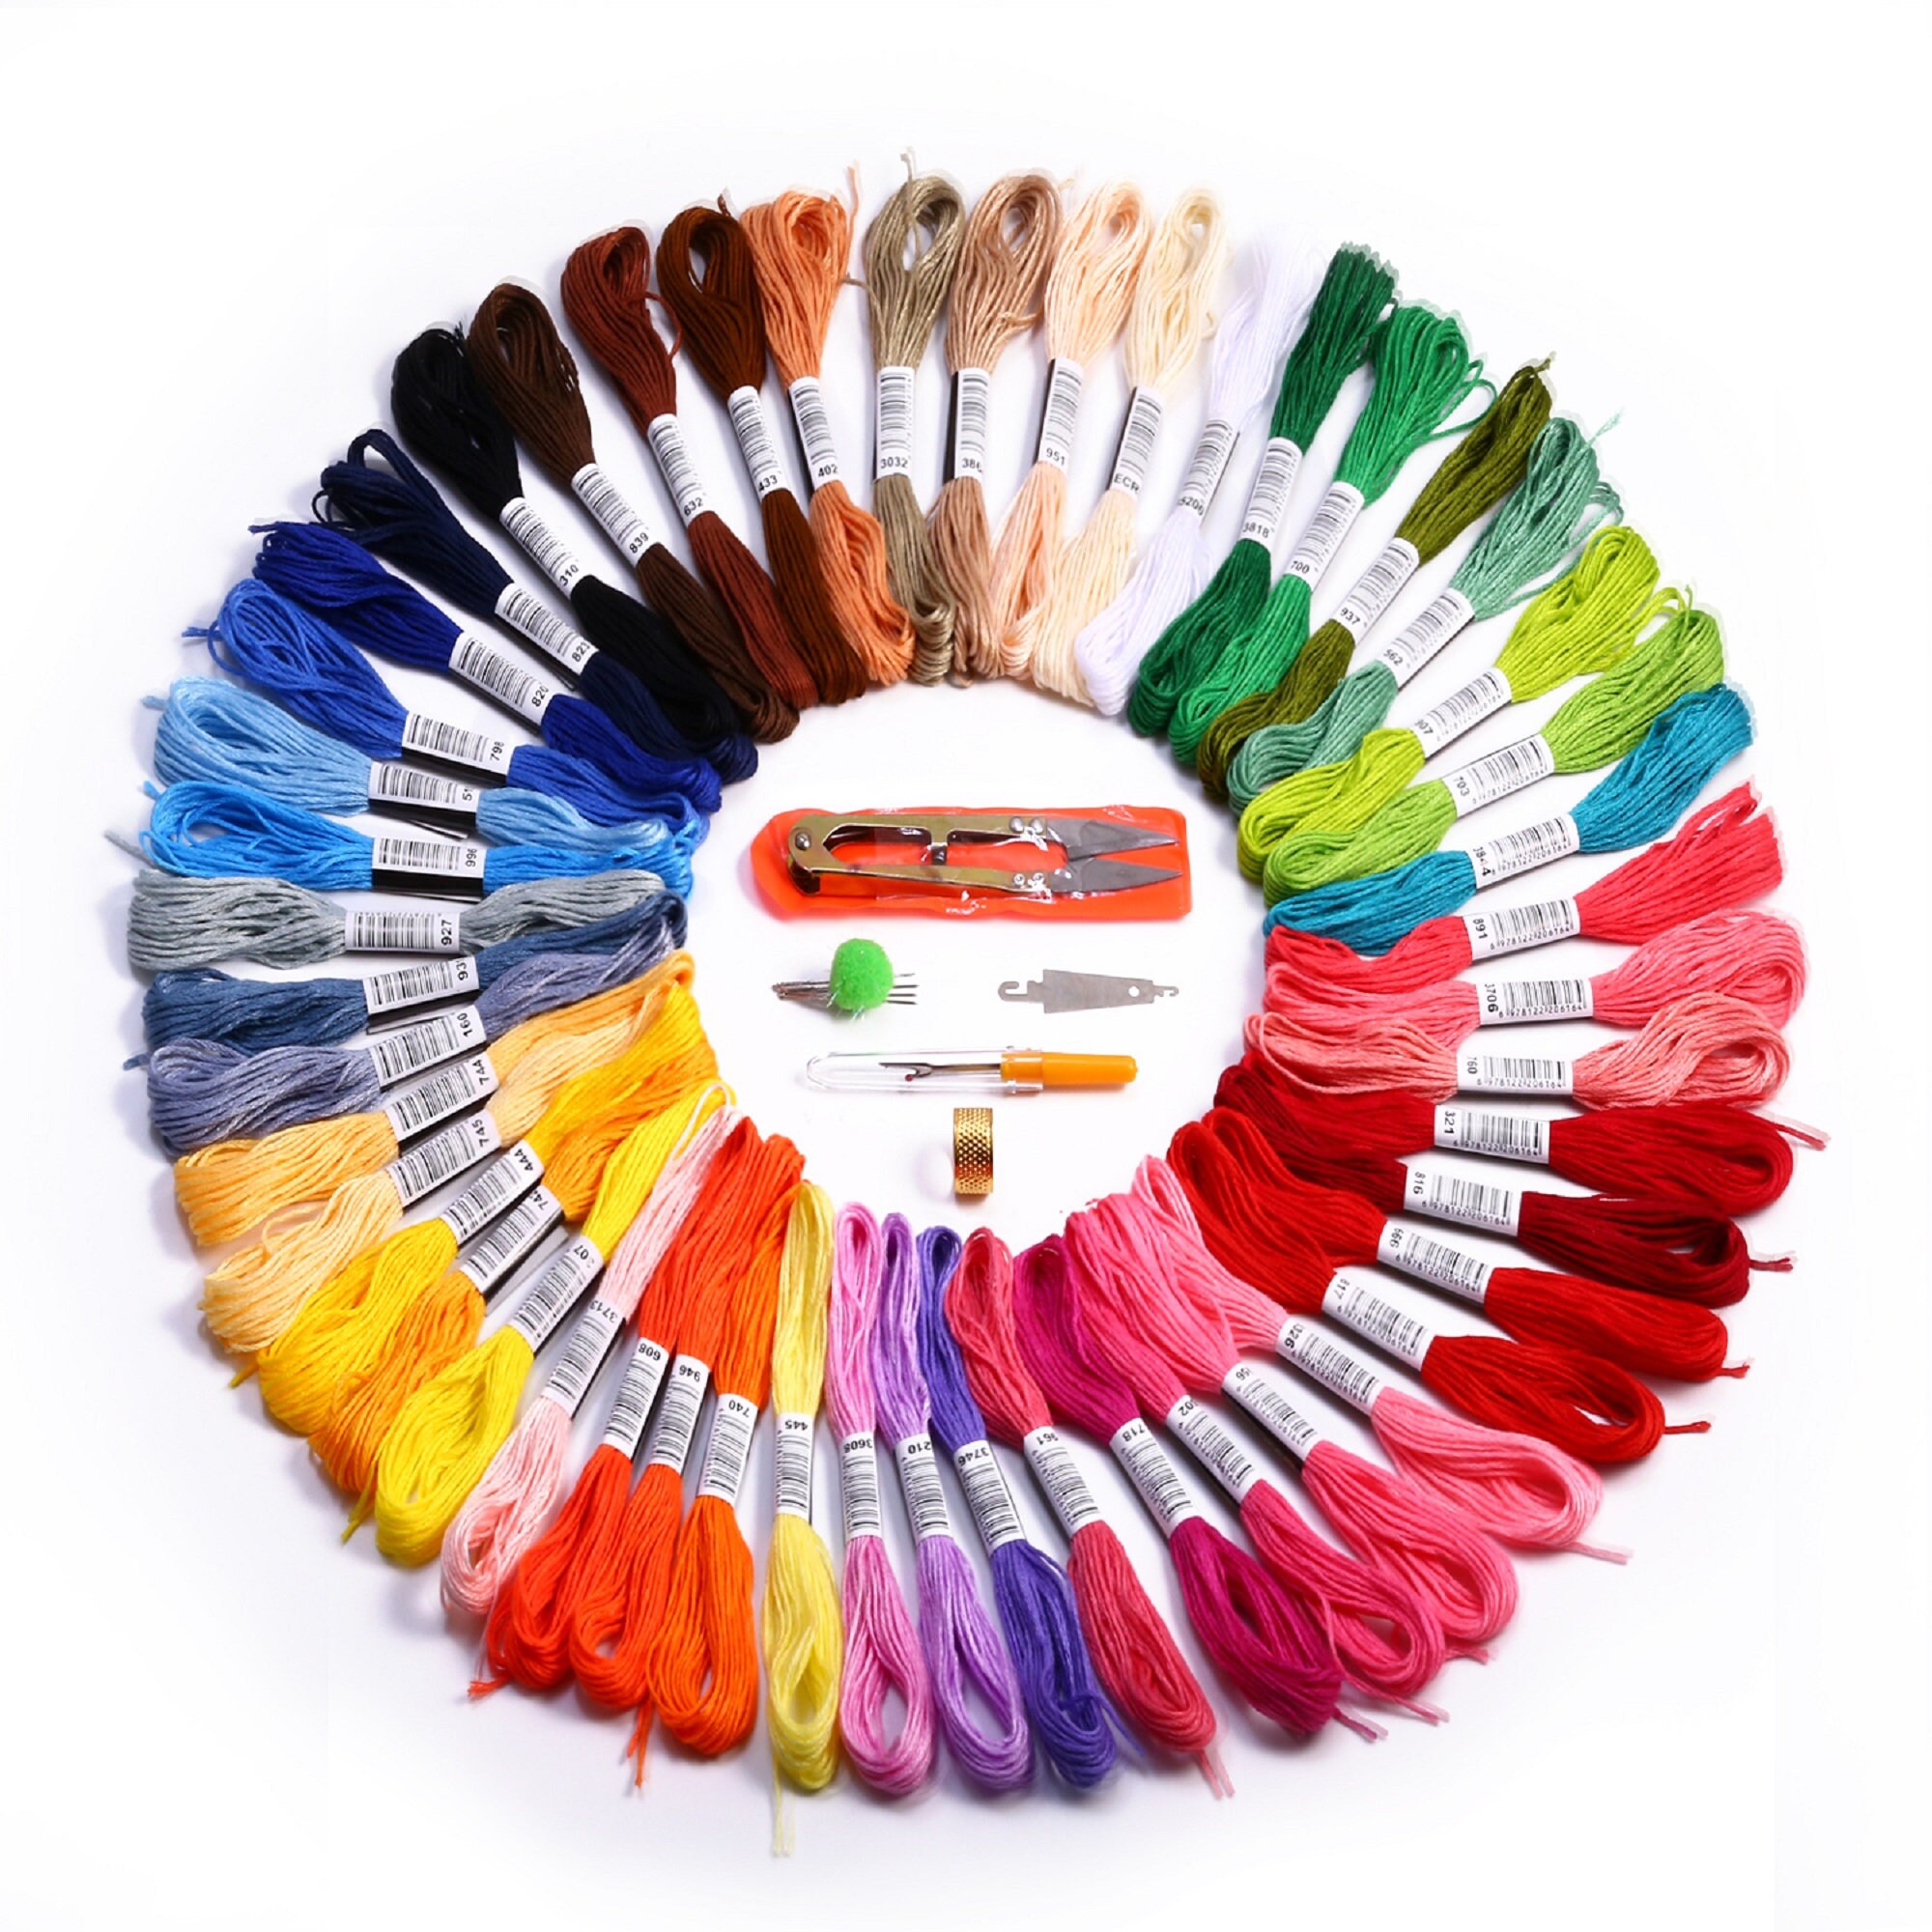 50 Skeins Embroidery Floss Rainbow Color Cross Stitch Threads,diy